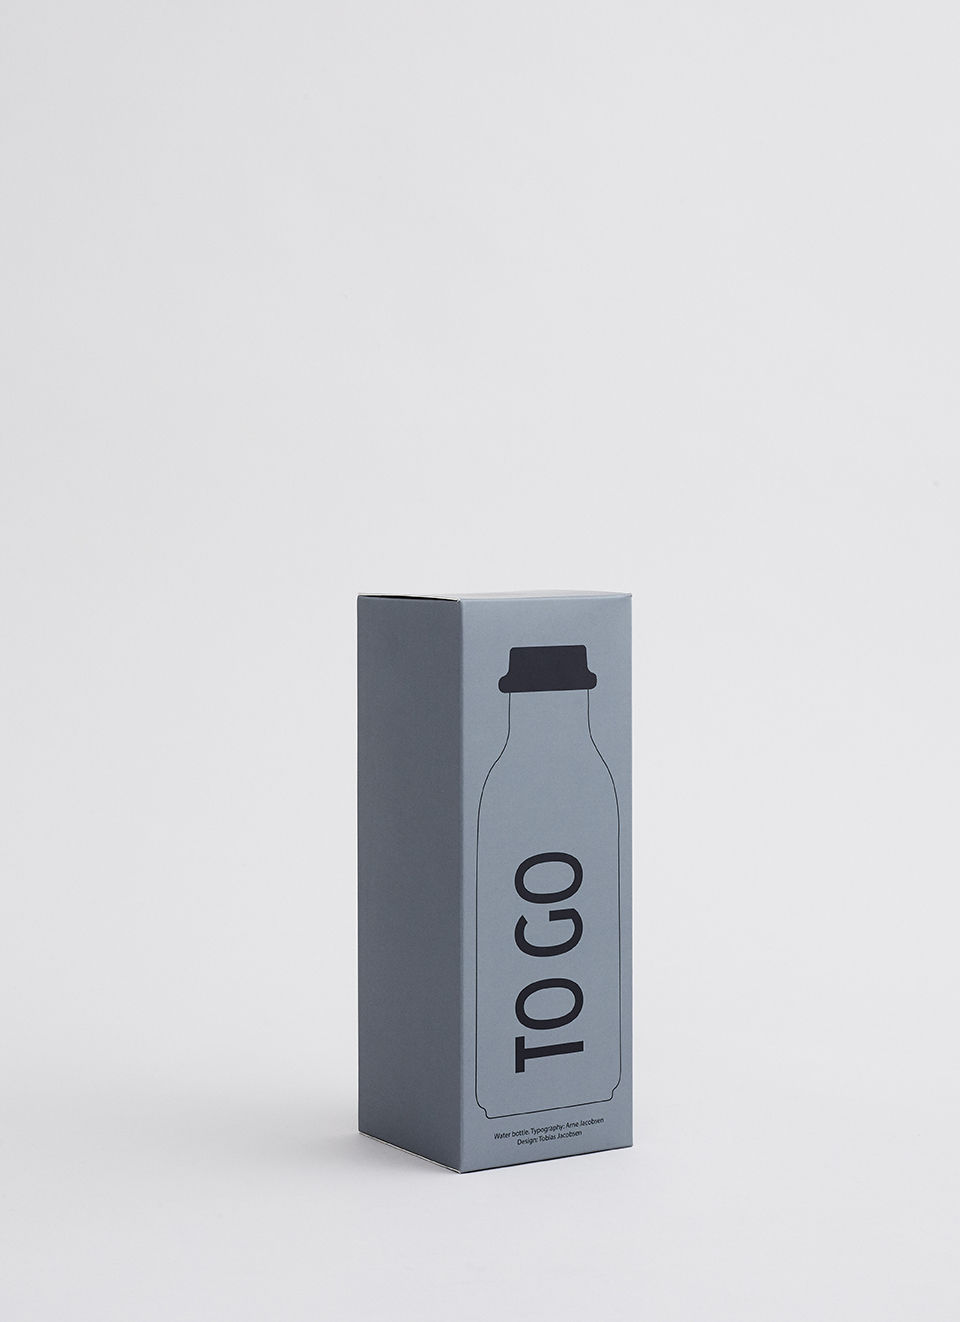 To GO Water Bottle grey